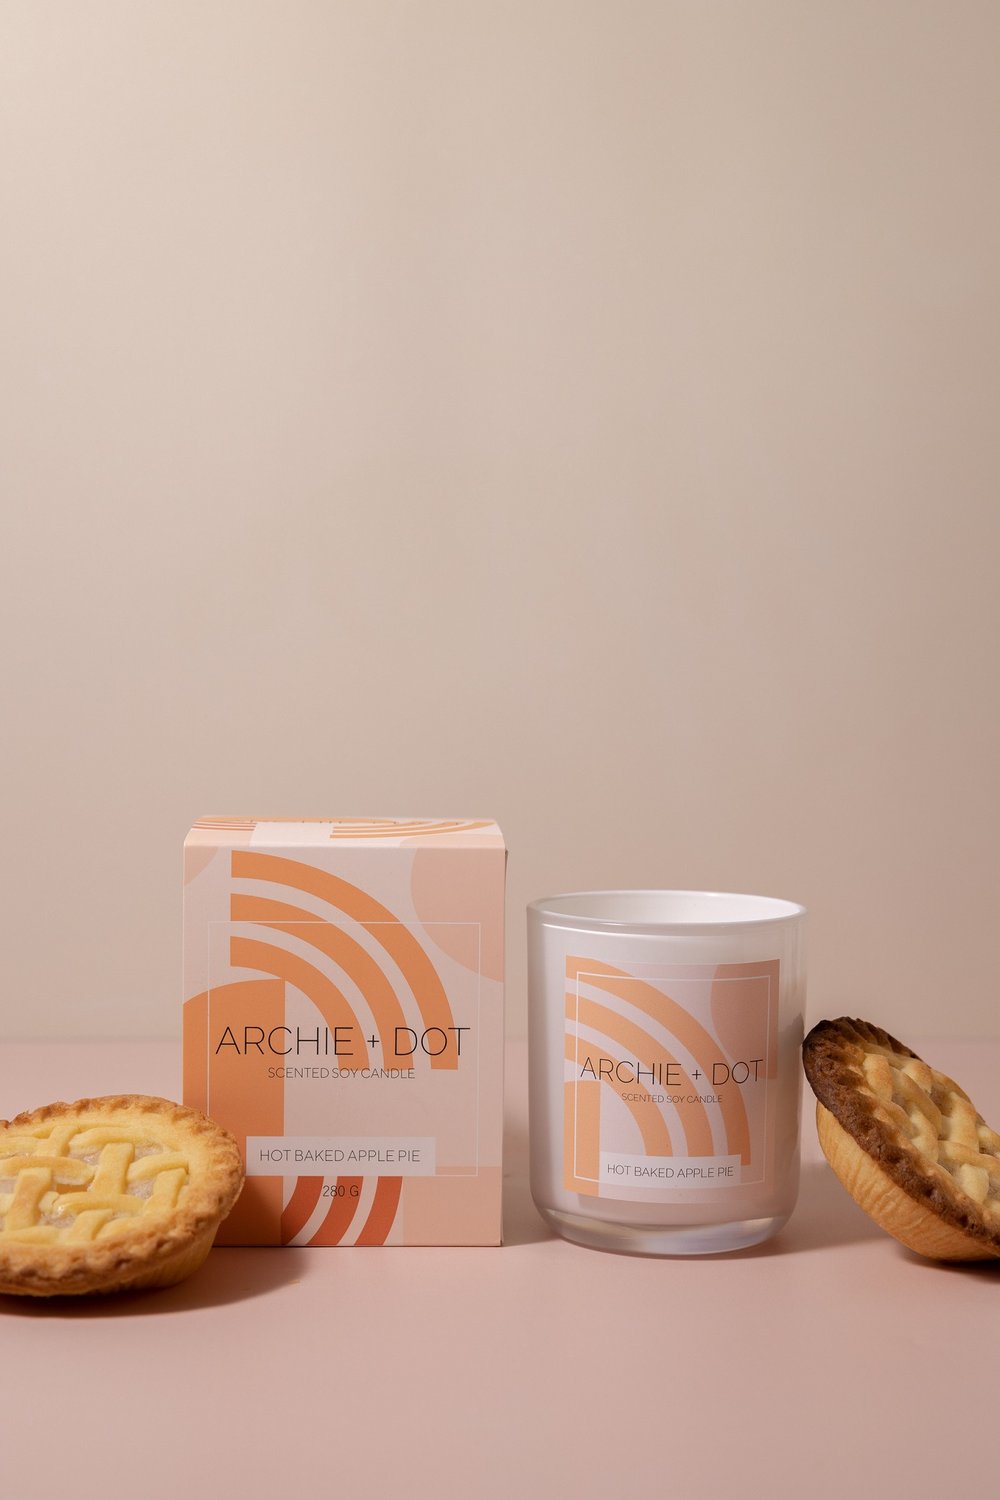 ARCHIE + DOT HOT BAKED APPLE PIE SOY CANDLE 280G